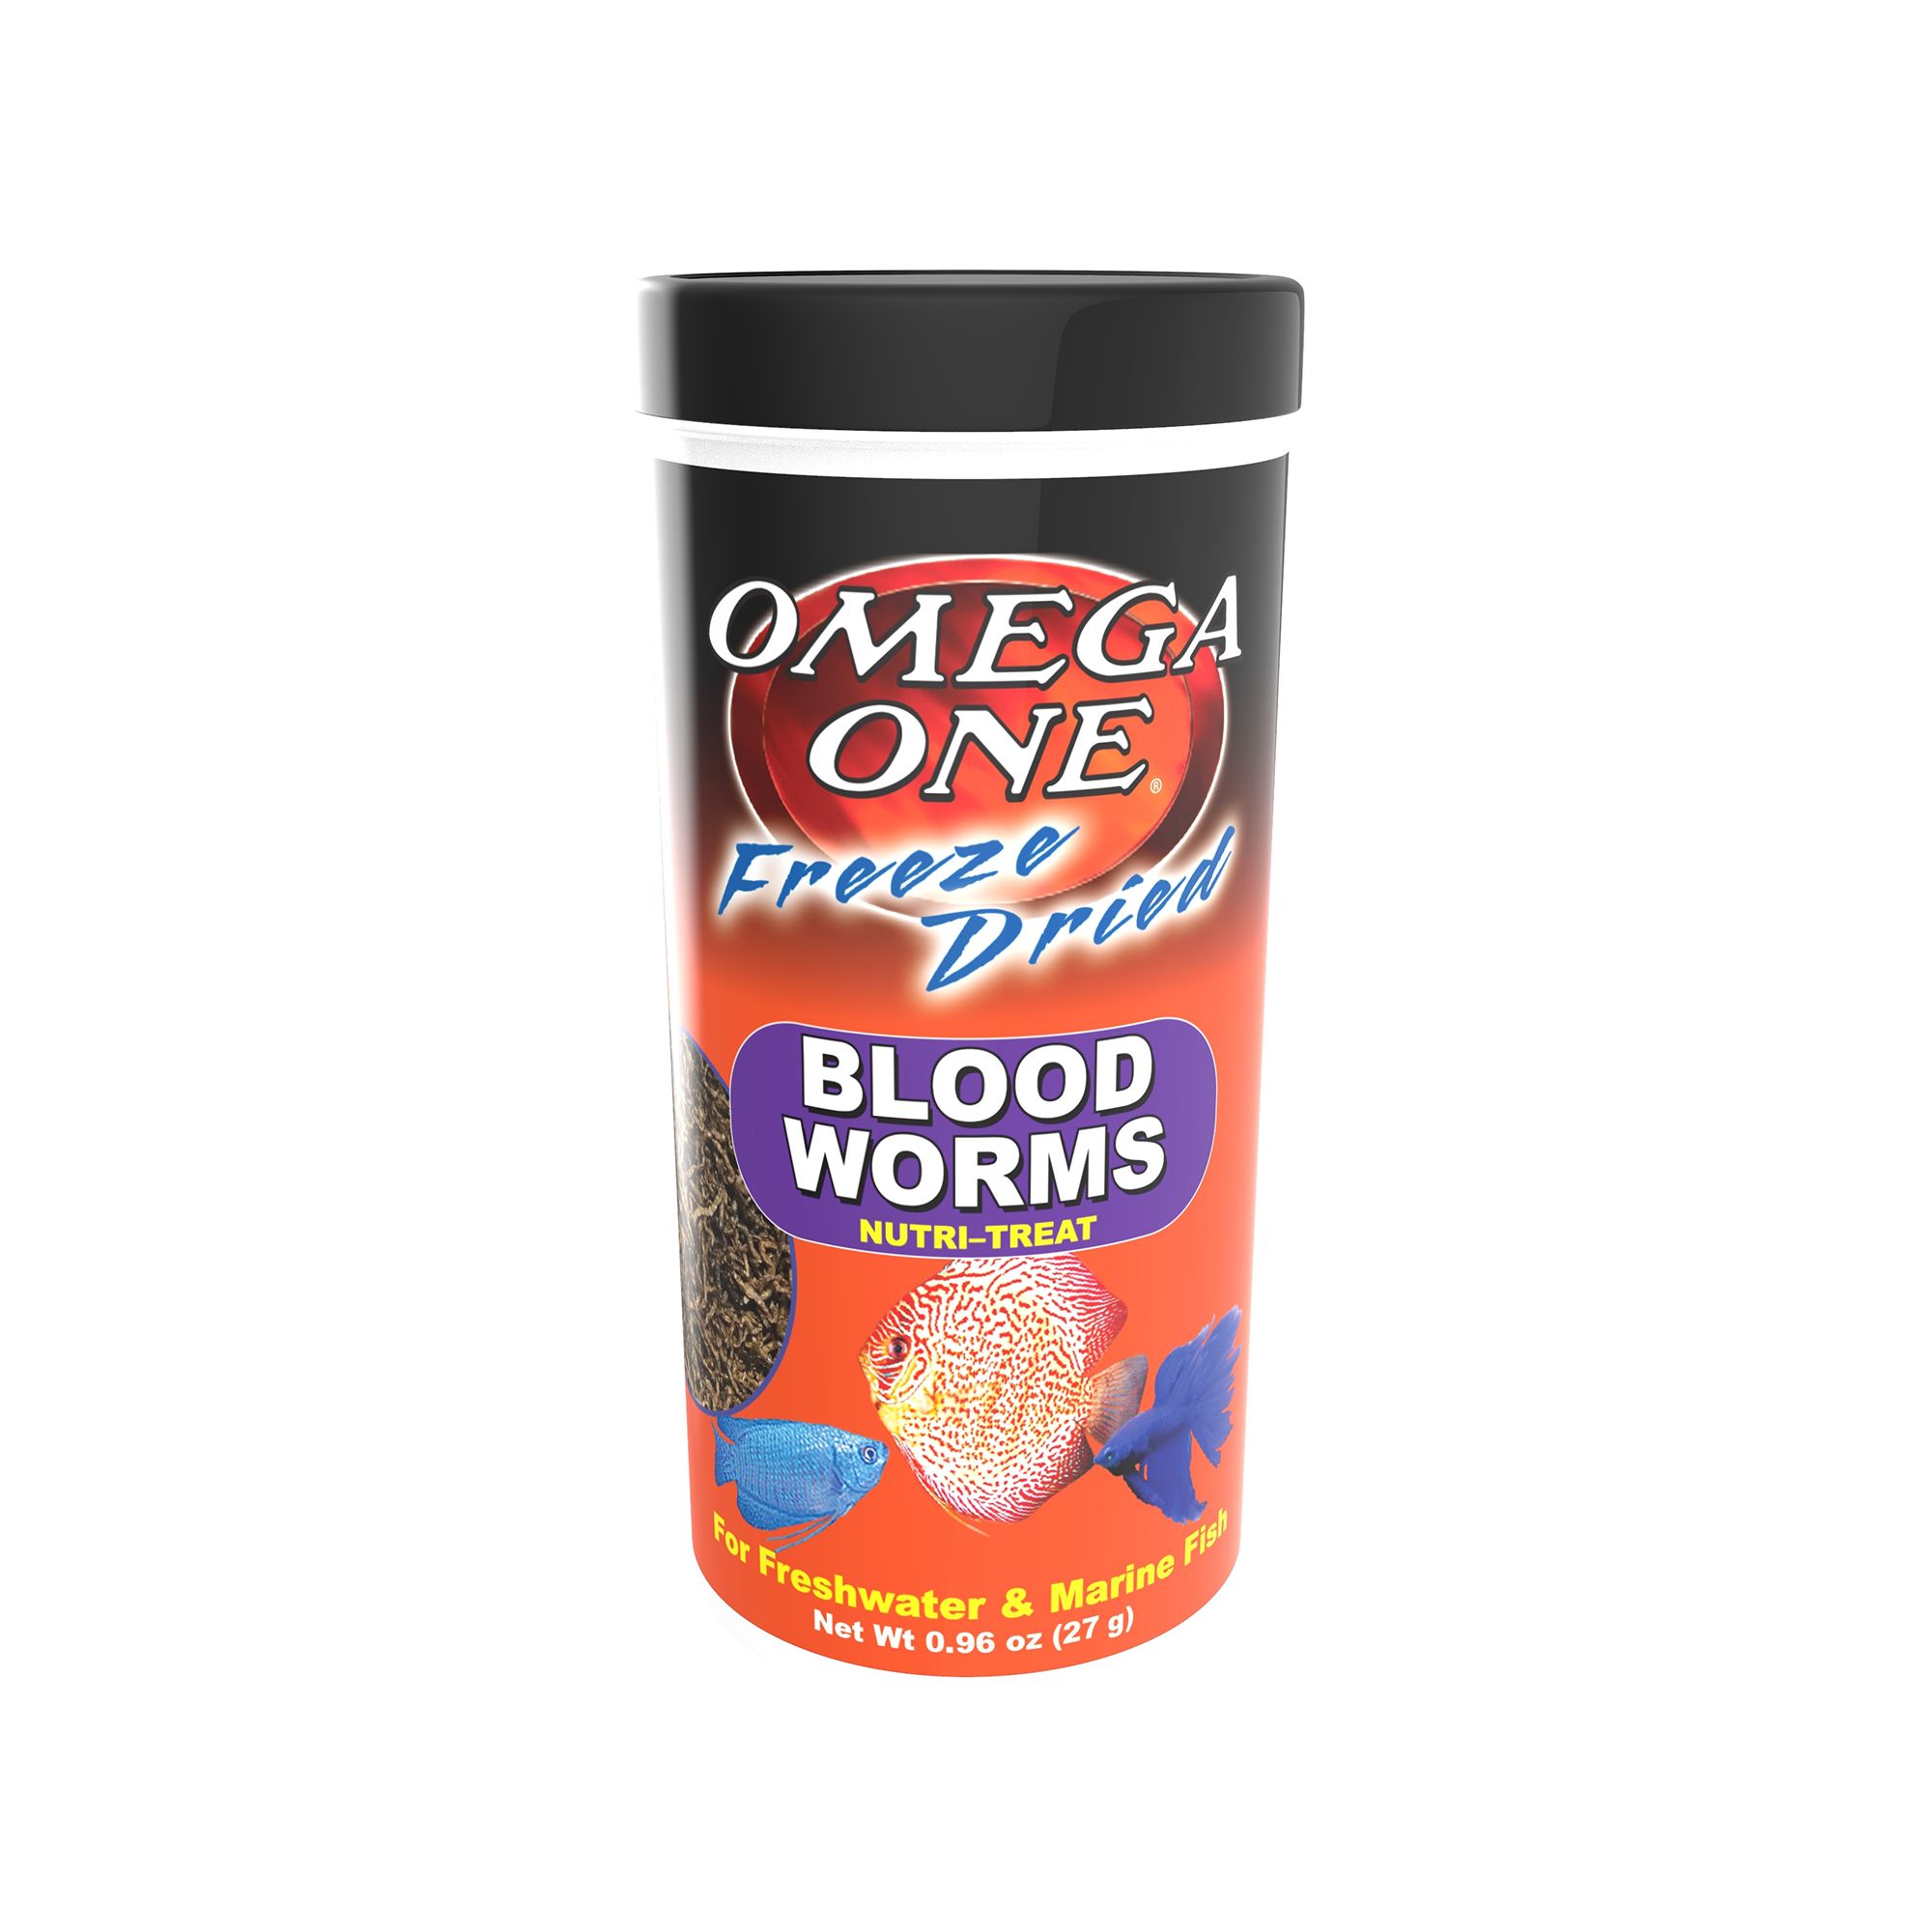 Omega™ One Freeze Dried Bloodworms Fish Treat, fish Food